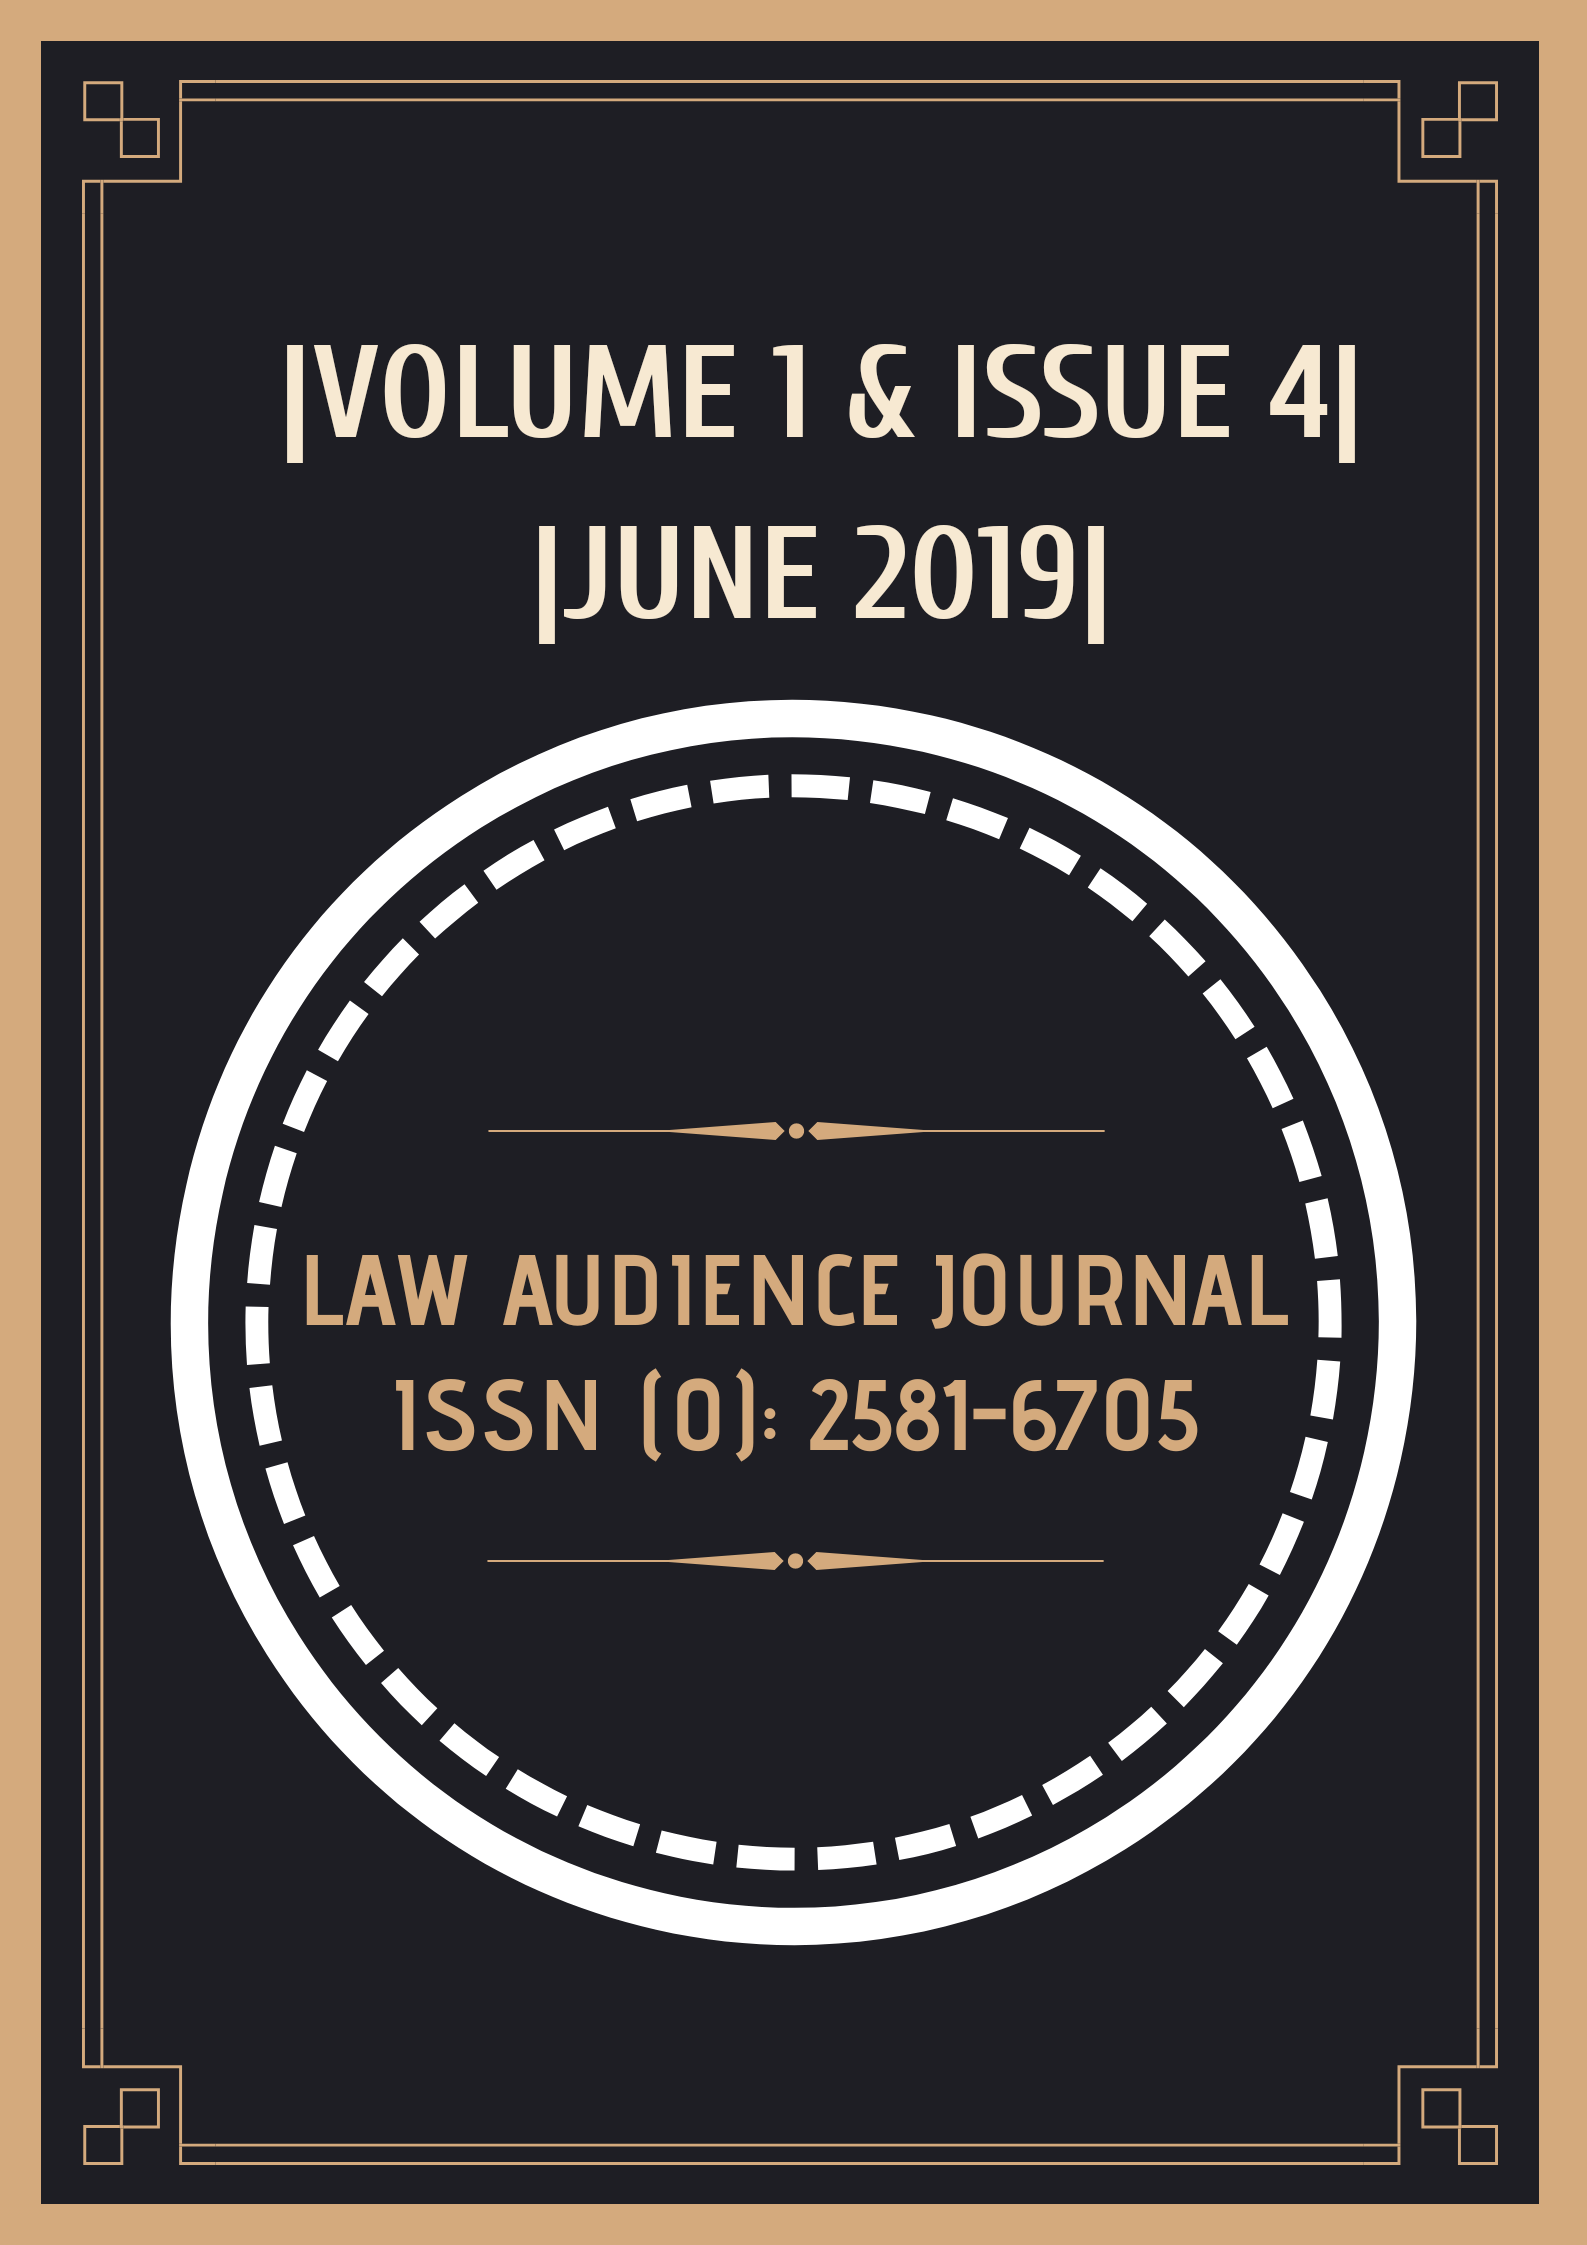 CALL FOR PAPERS: VOLUME 1 & ISSUE 4: JUNE 2019|[NO PUBLICATION FEE]